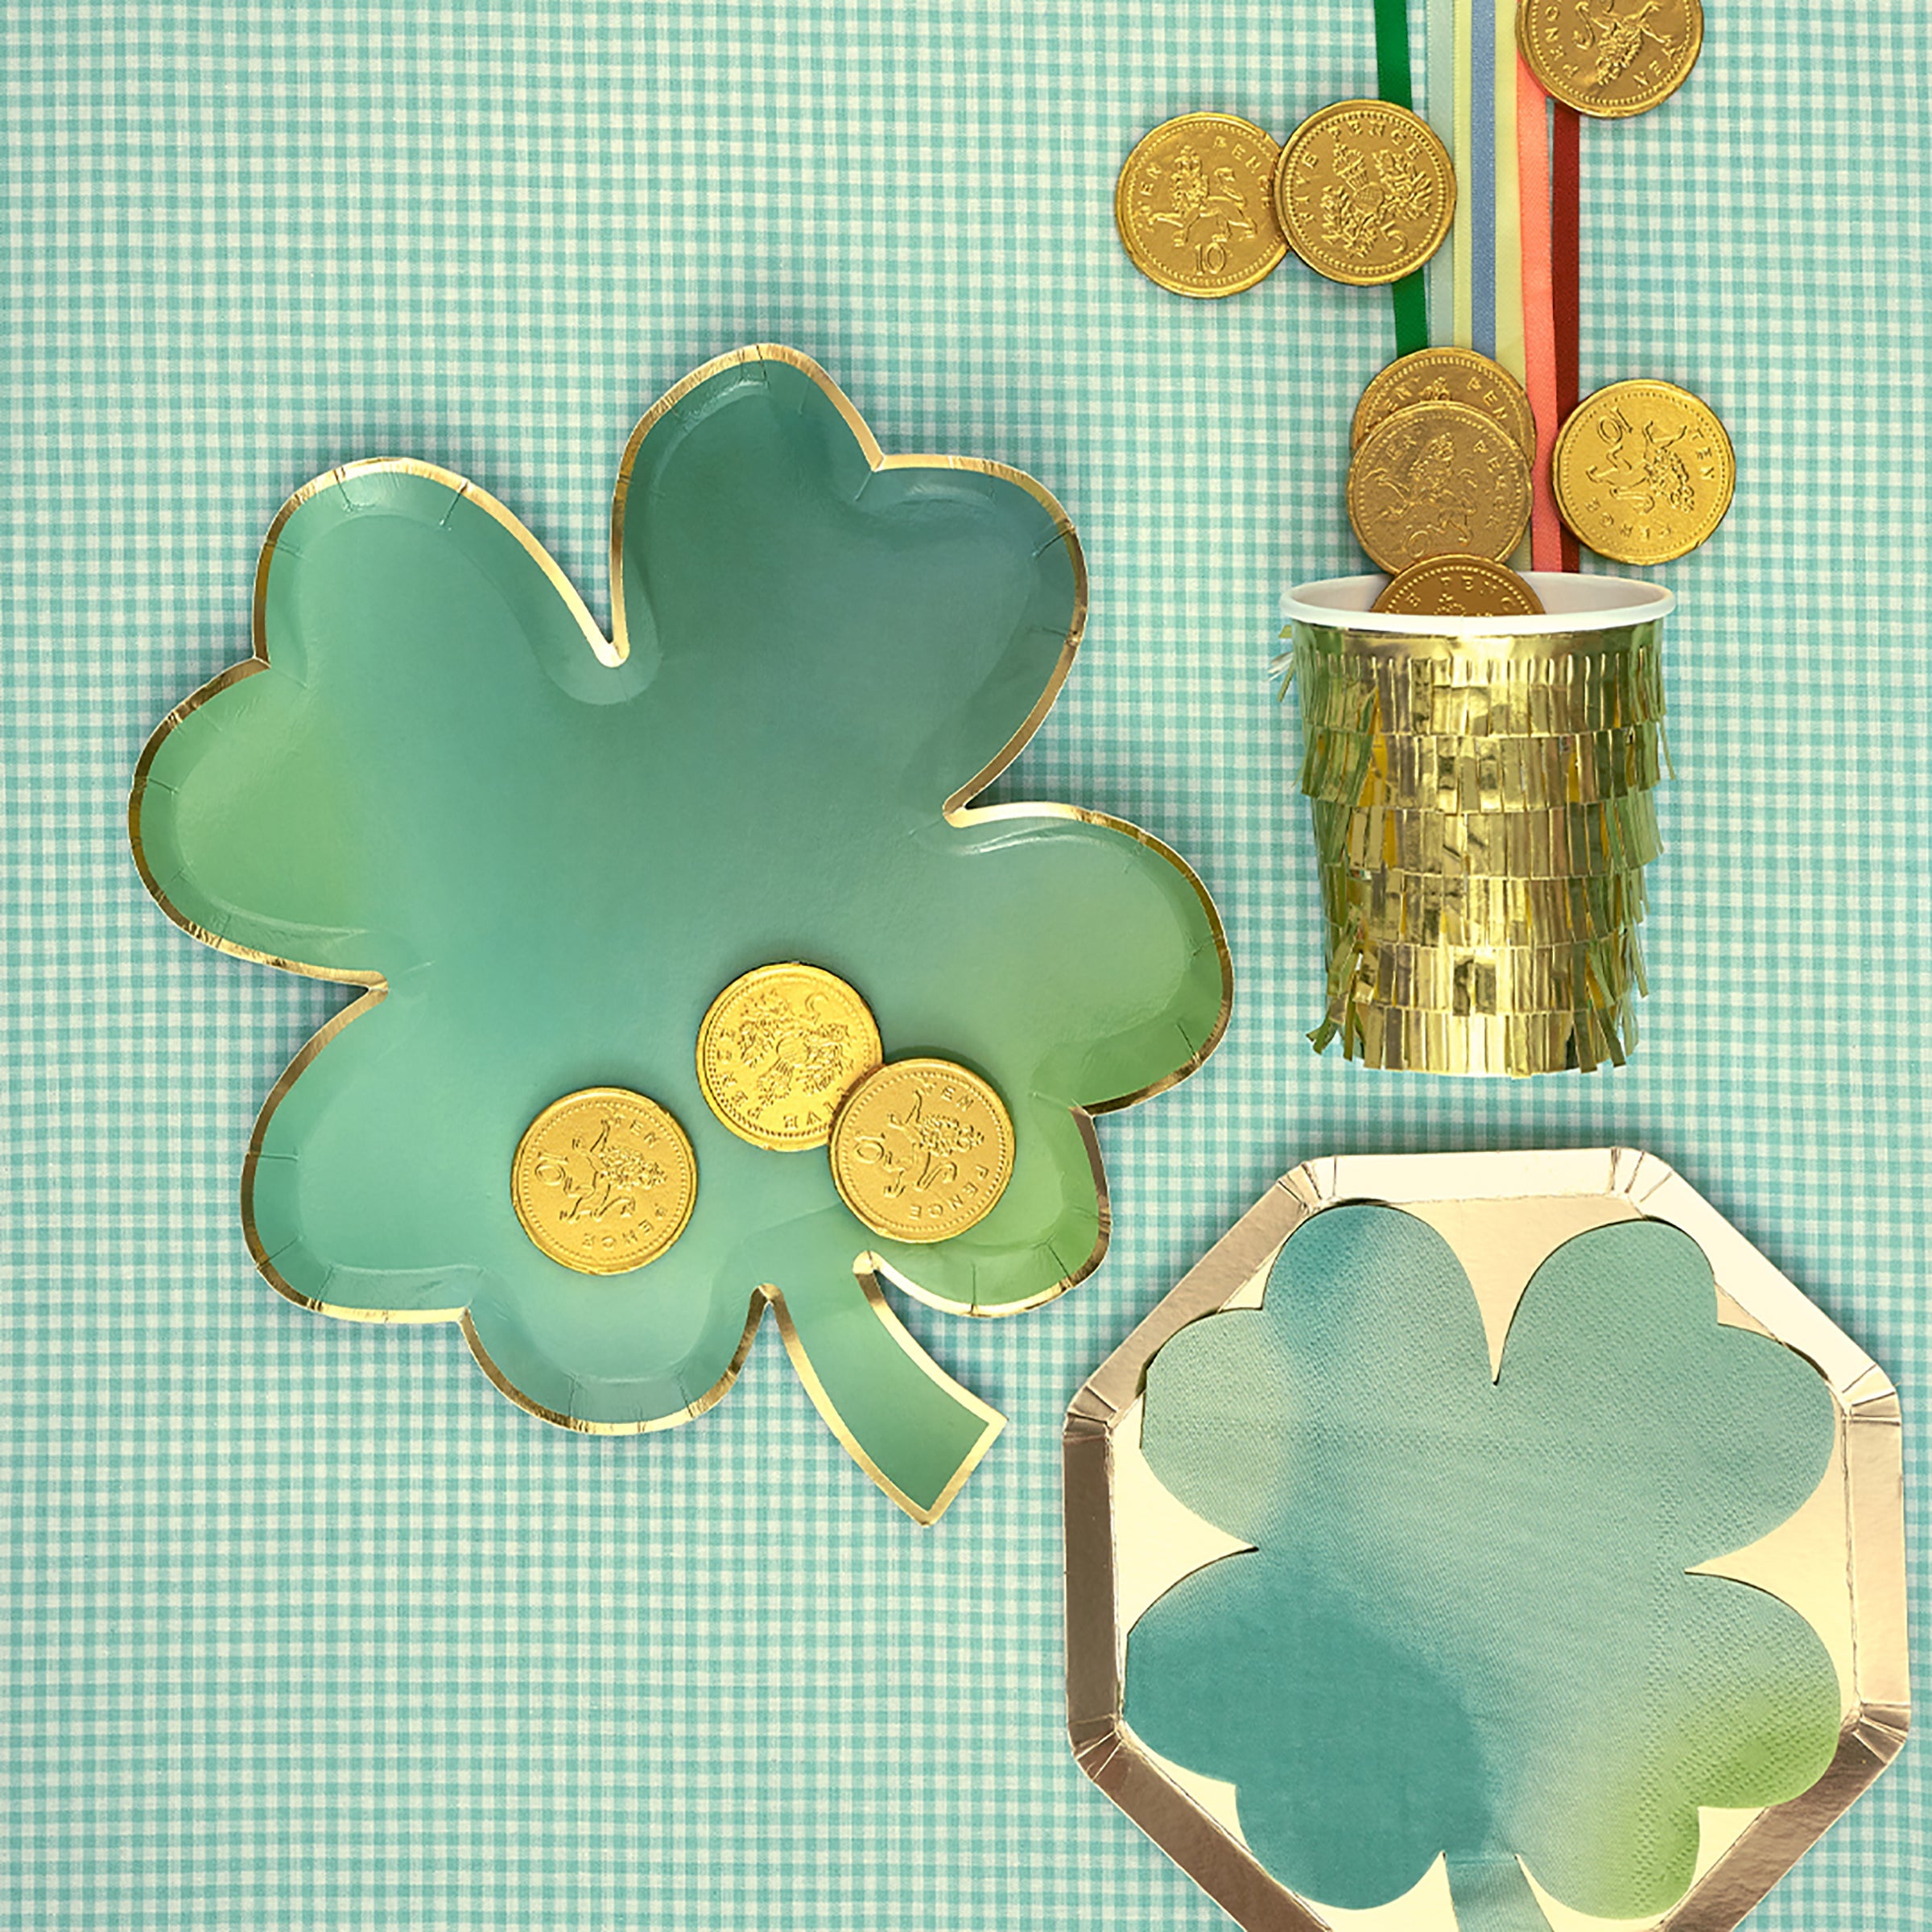 Our four leaf clover napkins are perfect for a St Patricks Day celebration.